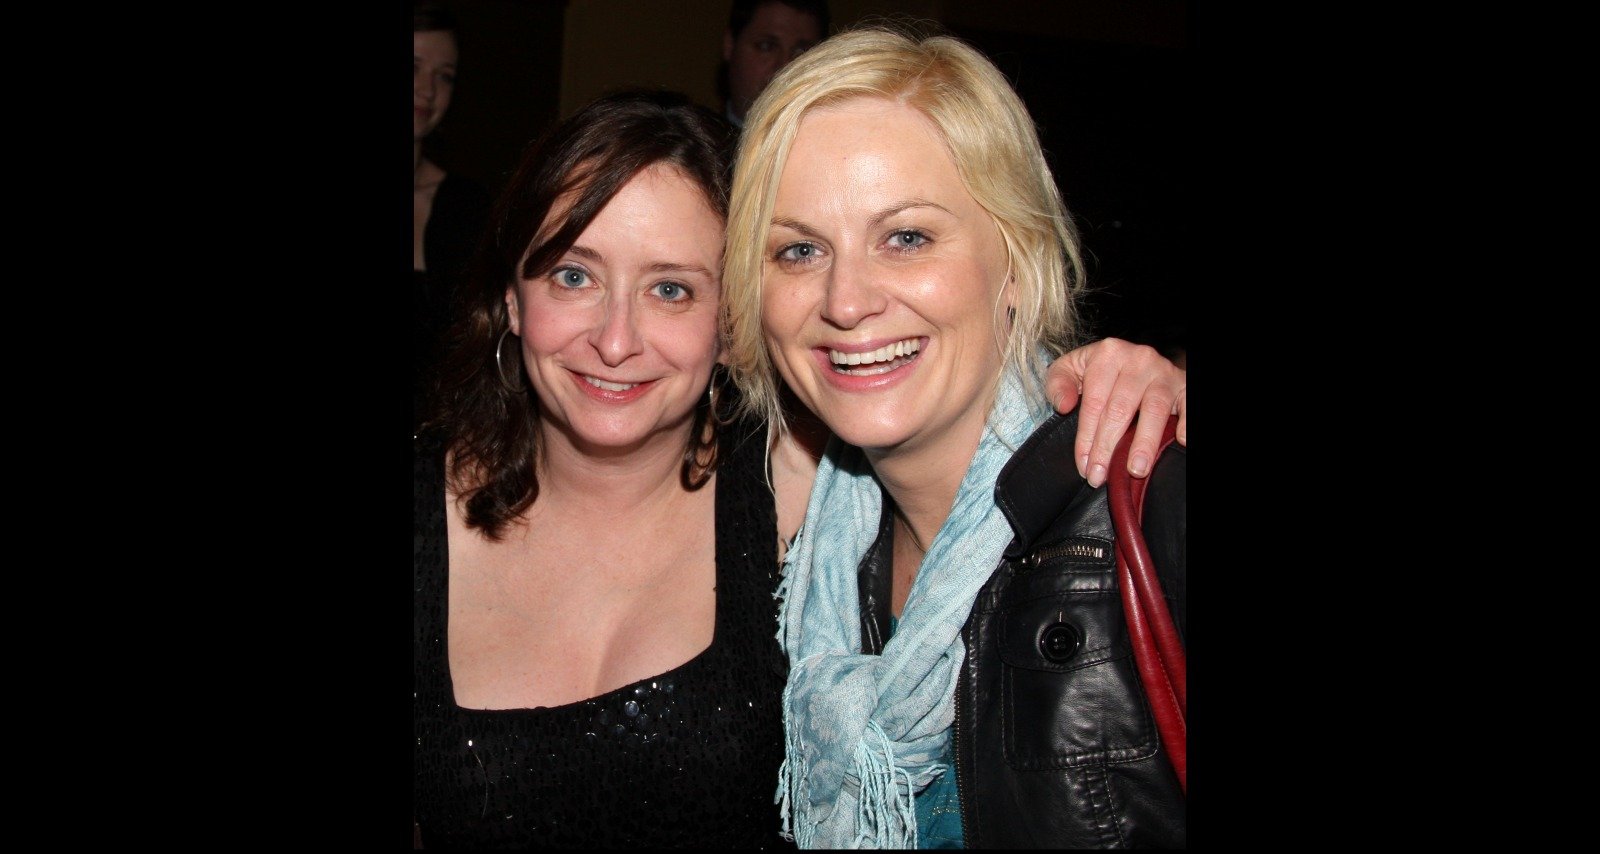 Are Amy Poehler and Rachel Dratch Related?